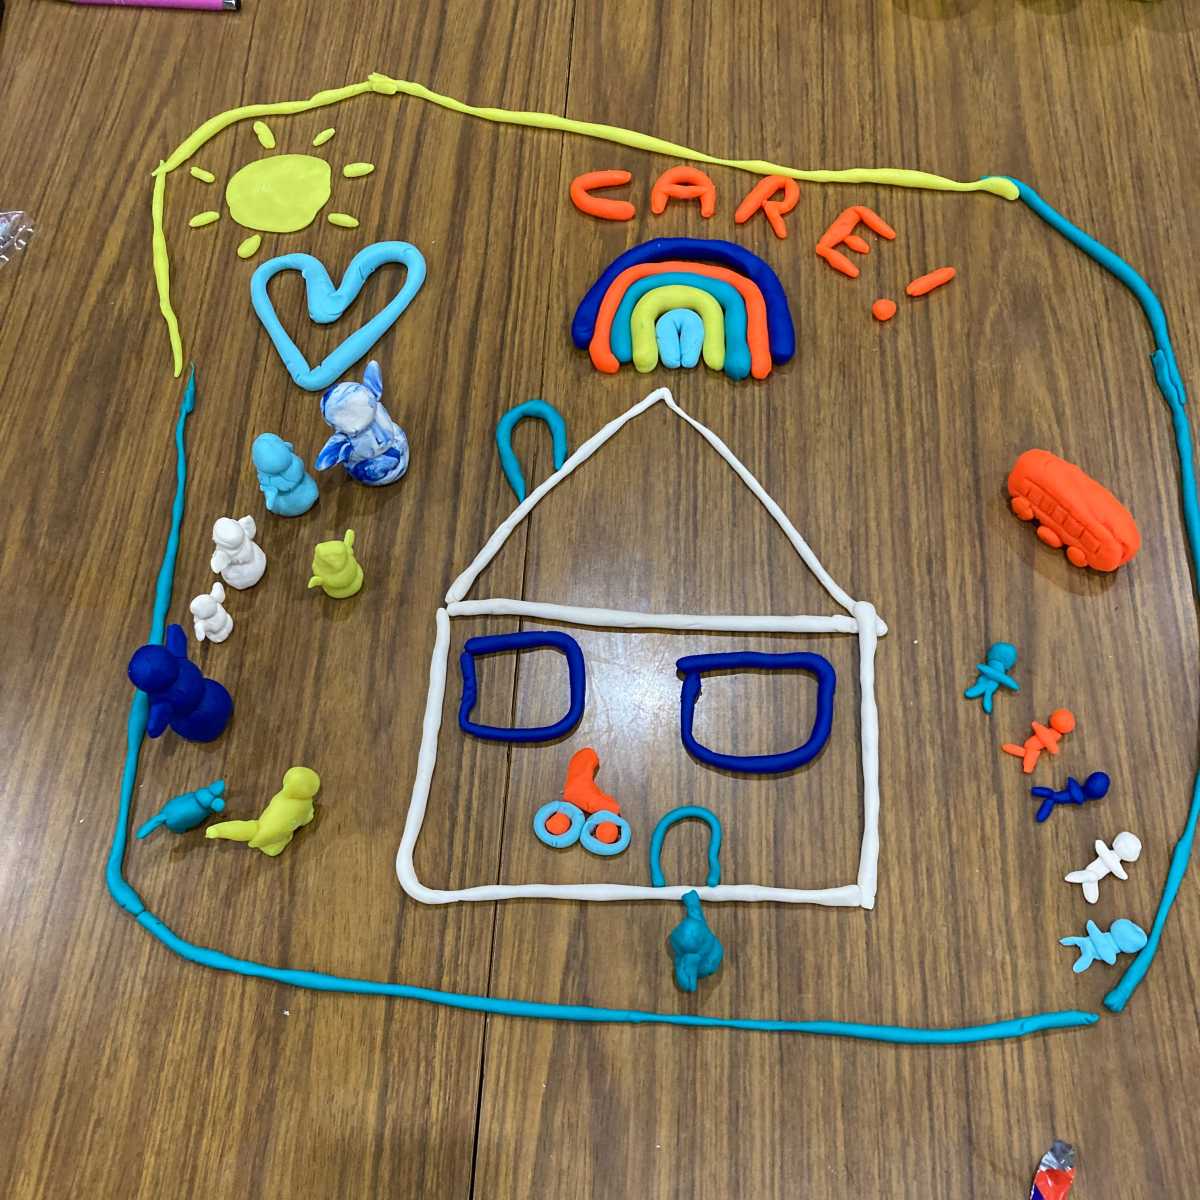 Staff created a visual to represent care from playdough of a house with human figures, a heart, a sun and the word CARE.